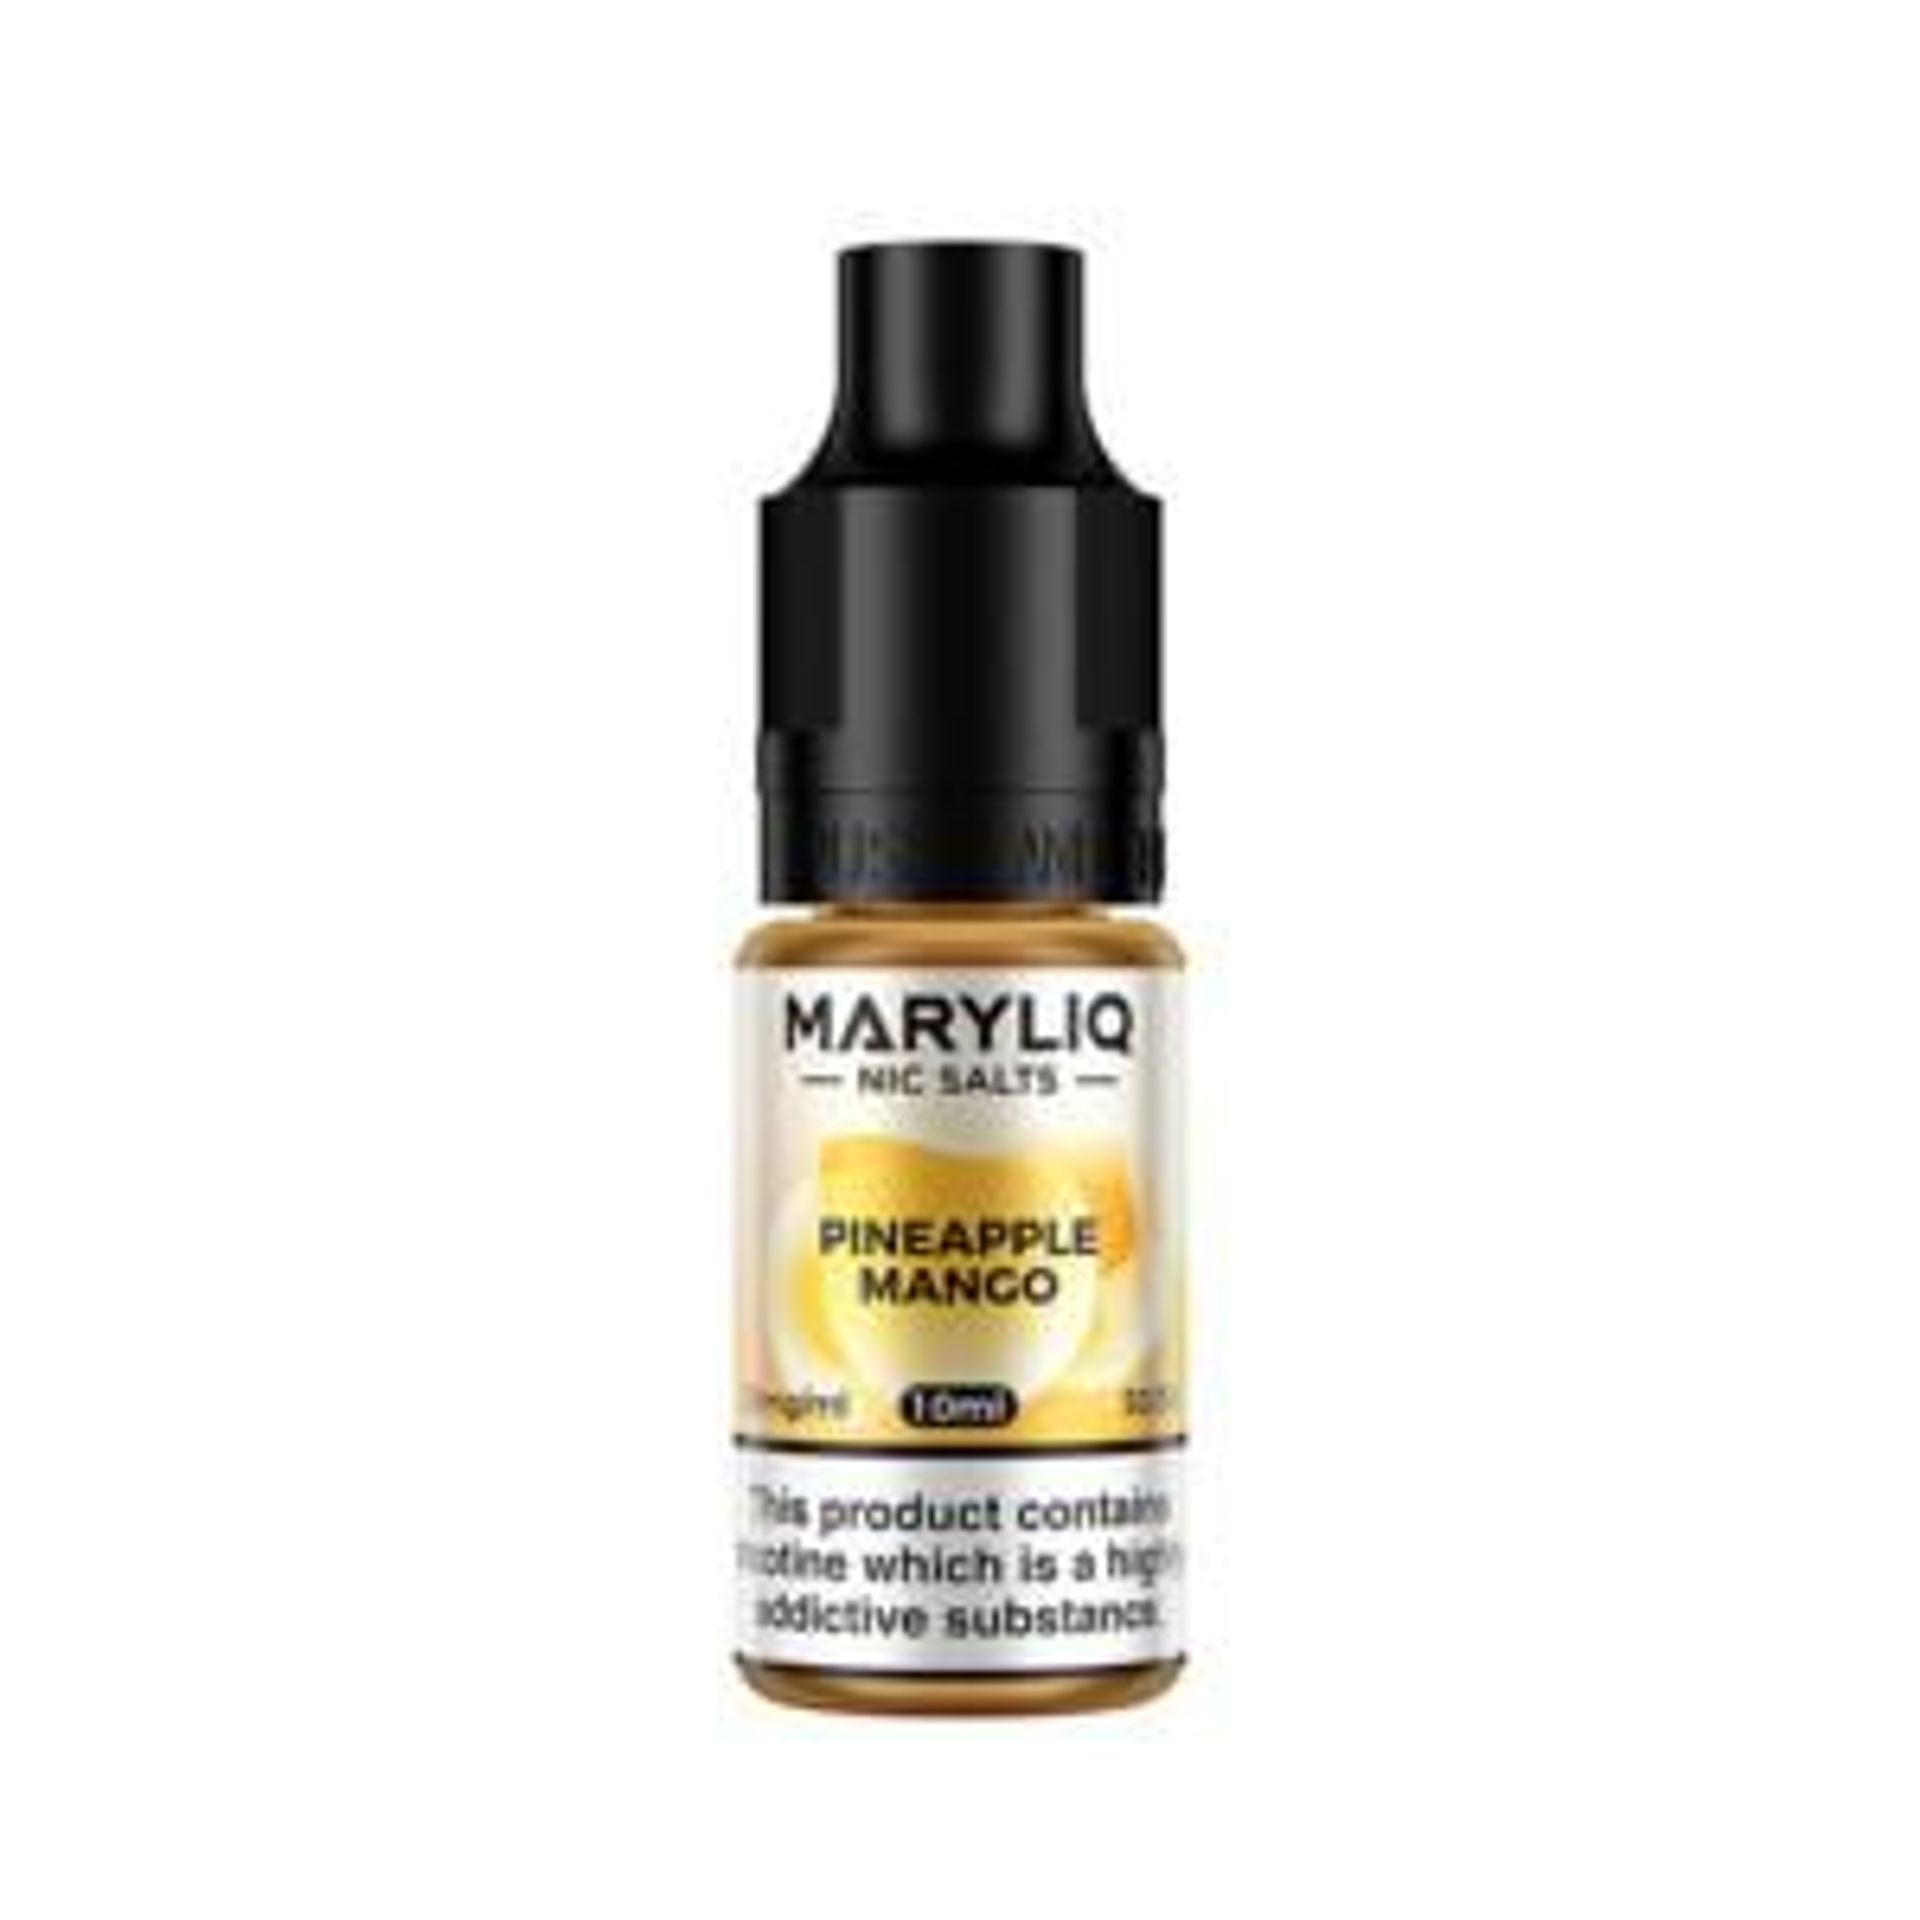 Image of Pineapple Mango by Lost Mary MaryLiq